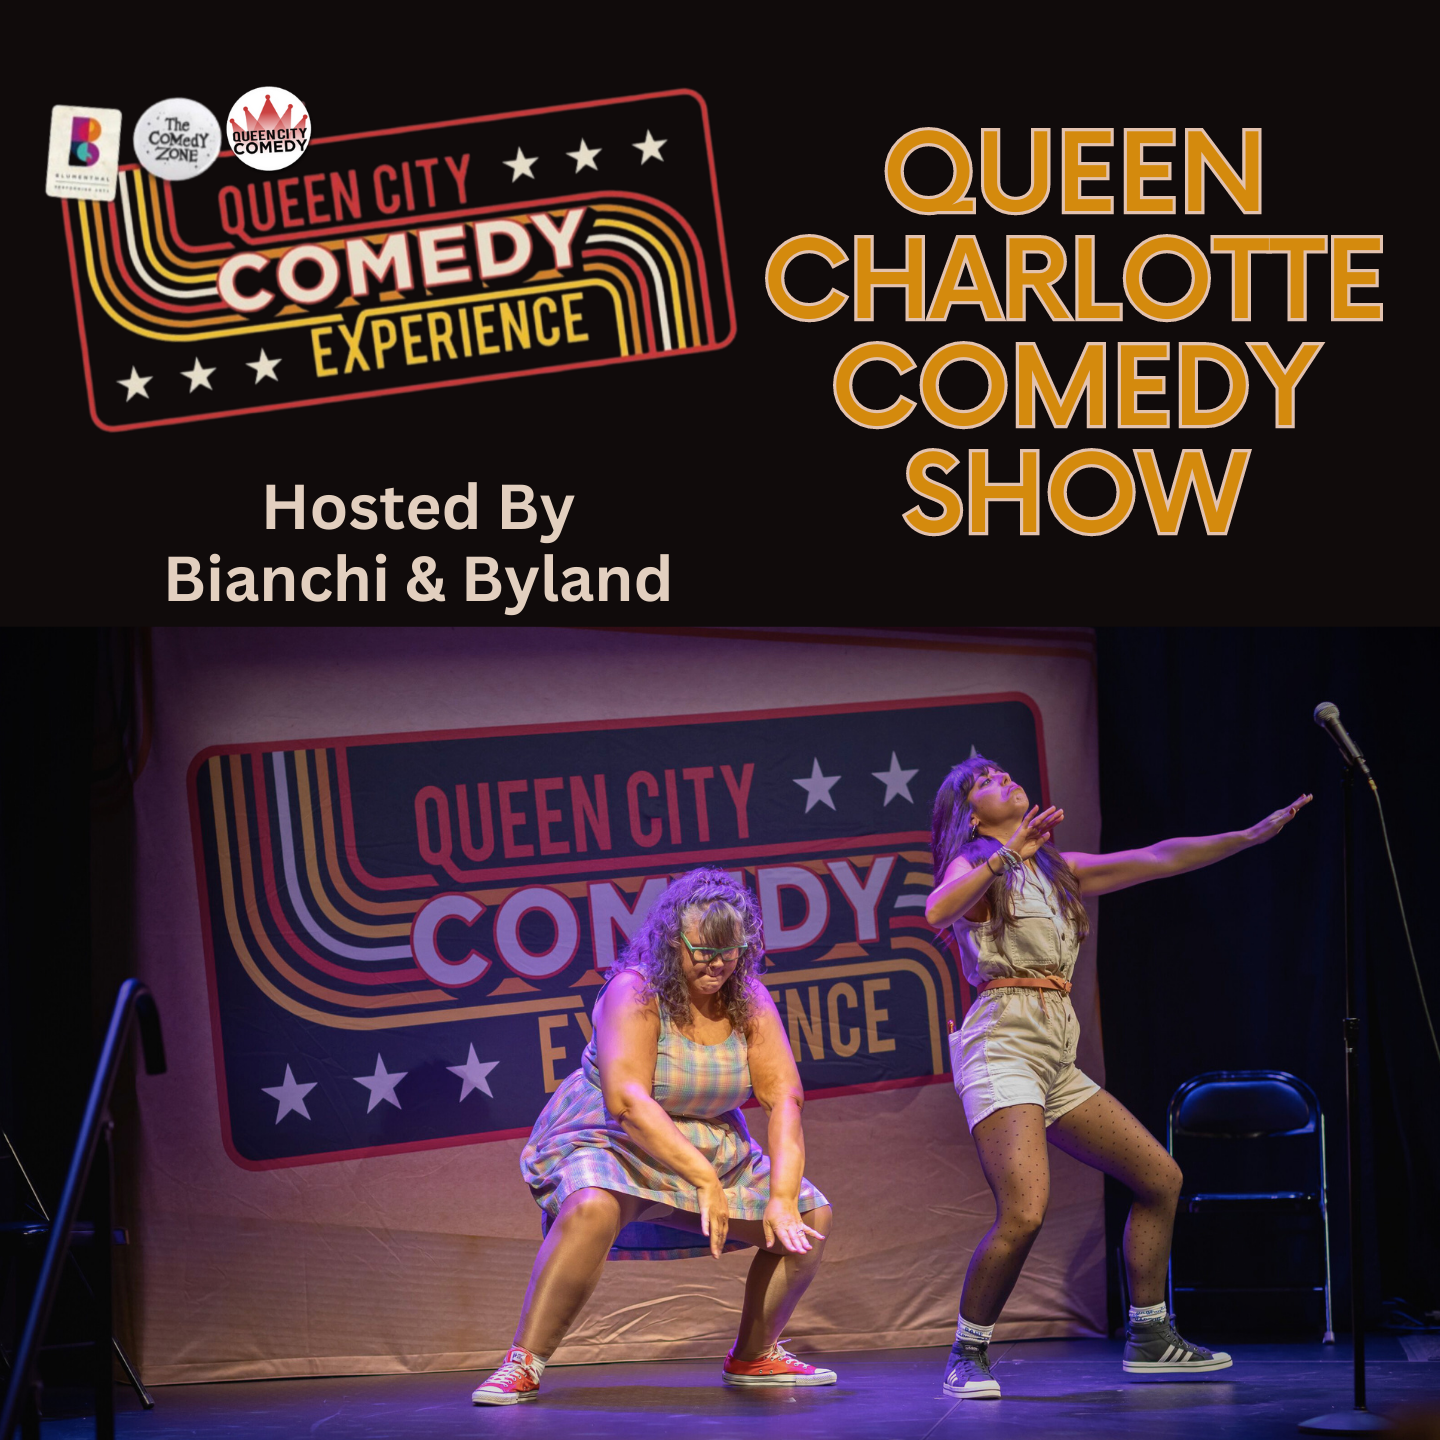 Queen Charlotte Comedy: Hosted by Bianchi & Byland